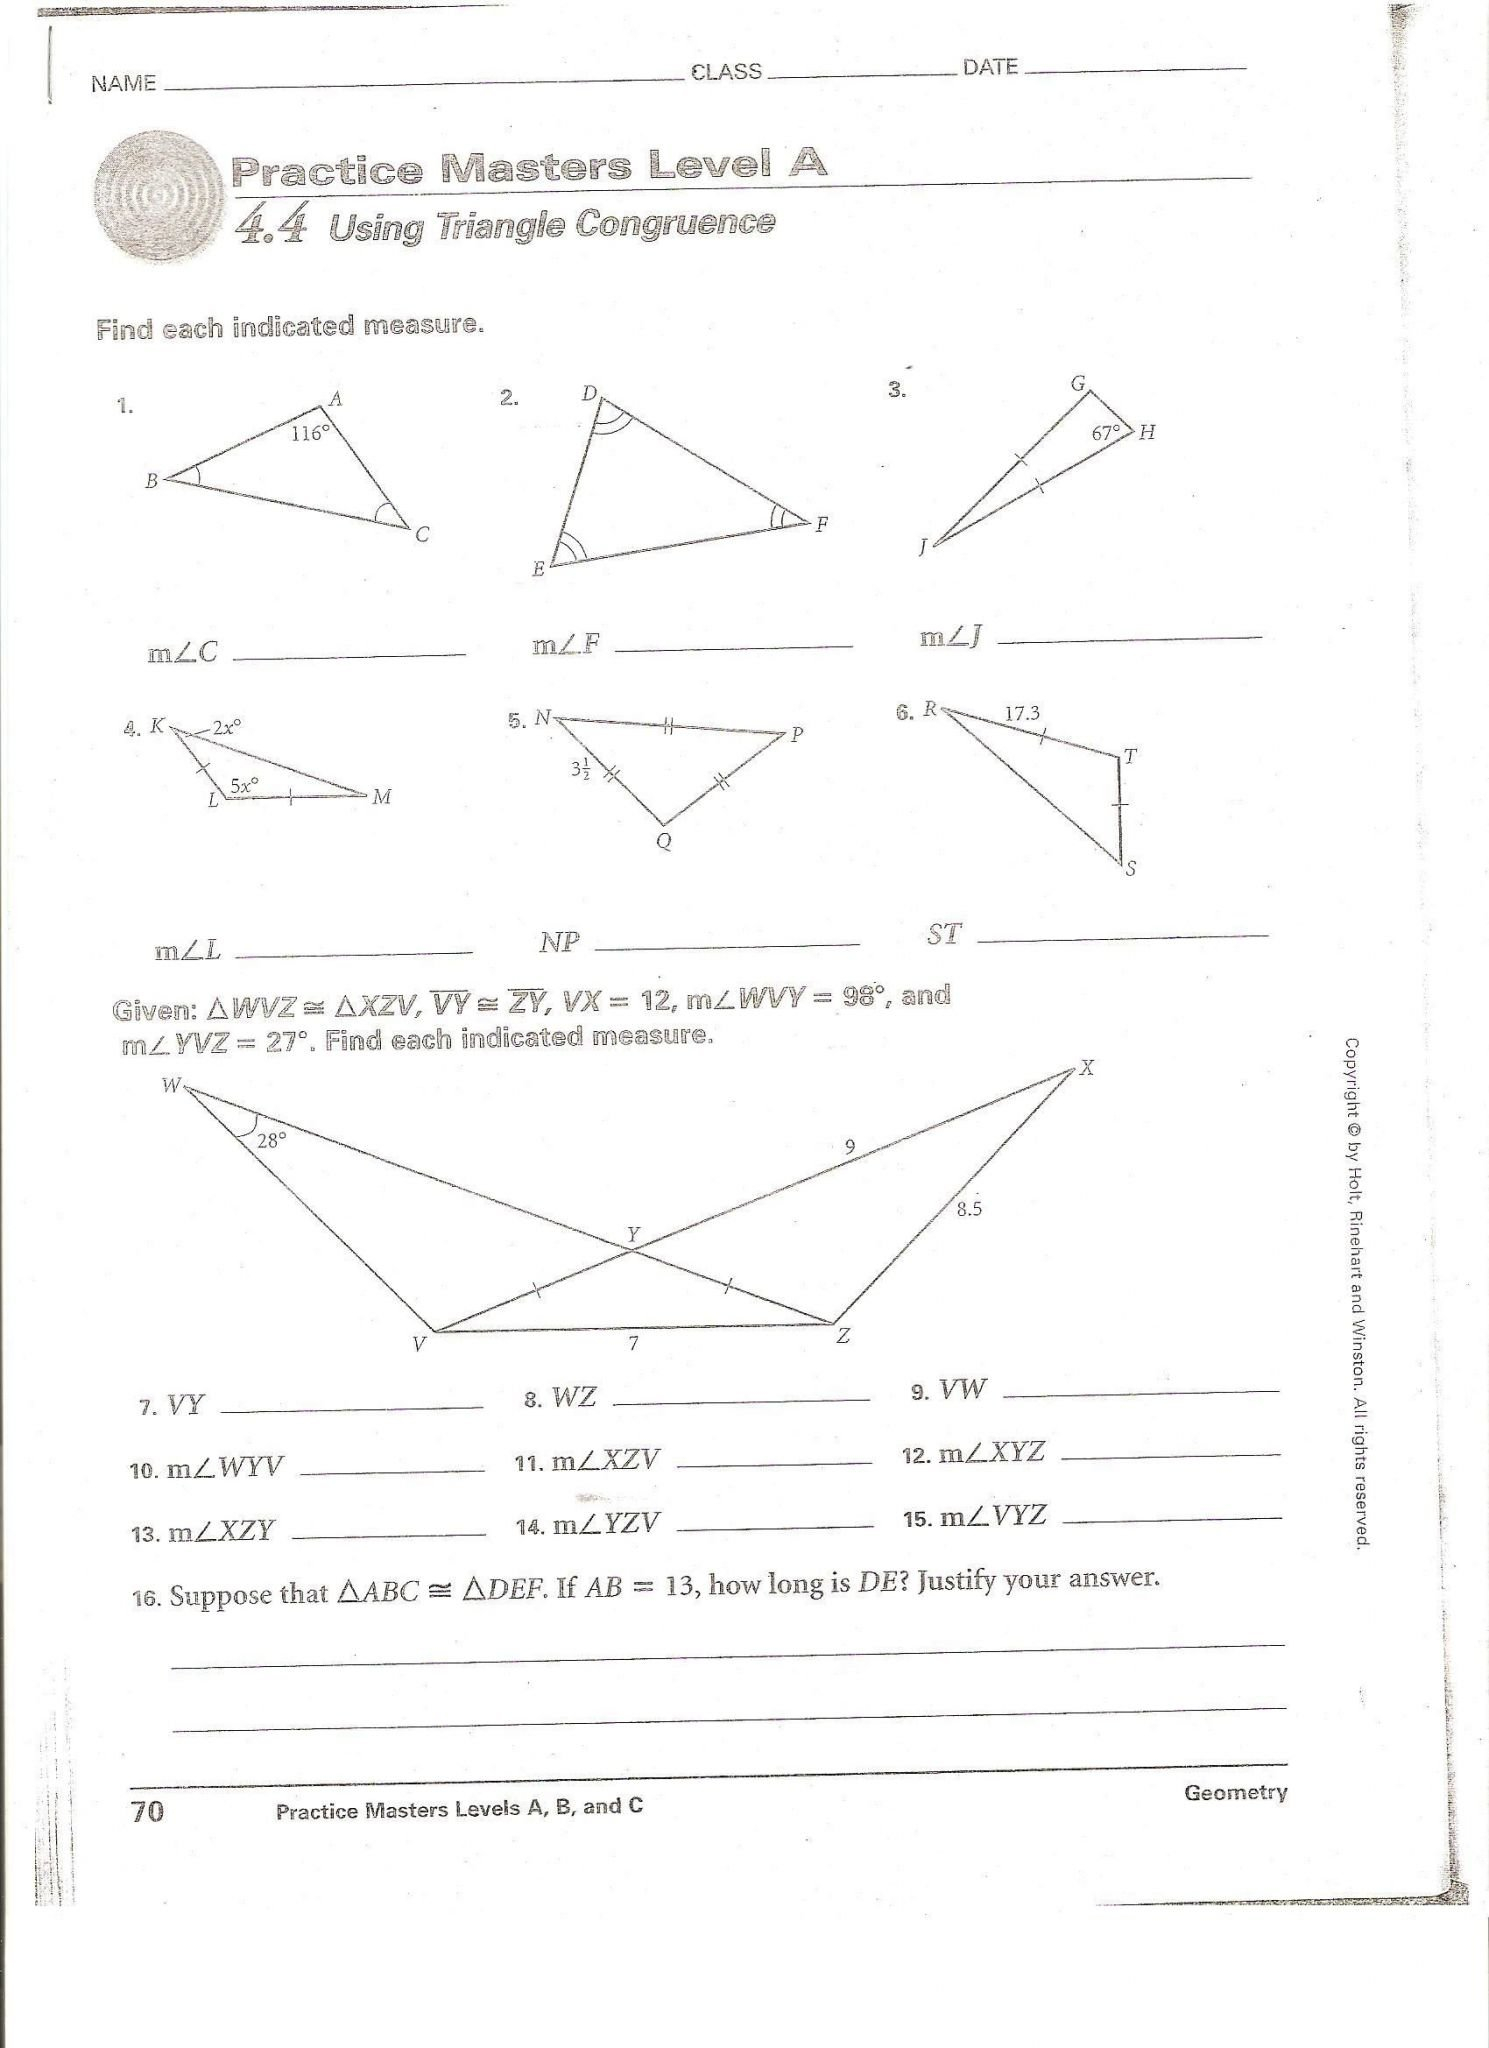 Chapter 4 Congruent Triangles Worksheet Answers  Briefencounters Pertaining To Chapter 4 Congruent Triangles Worksheet Answers